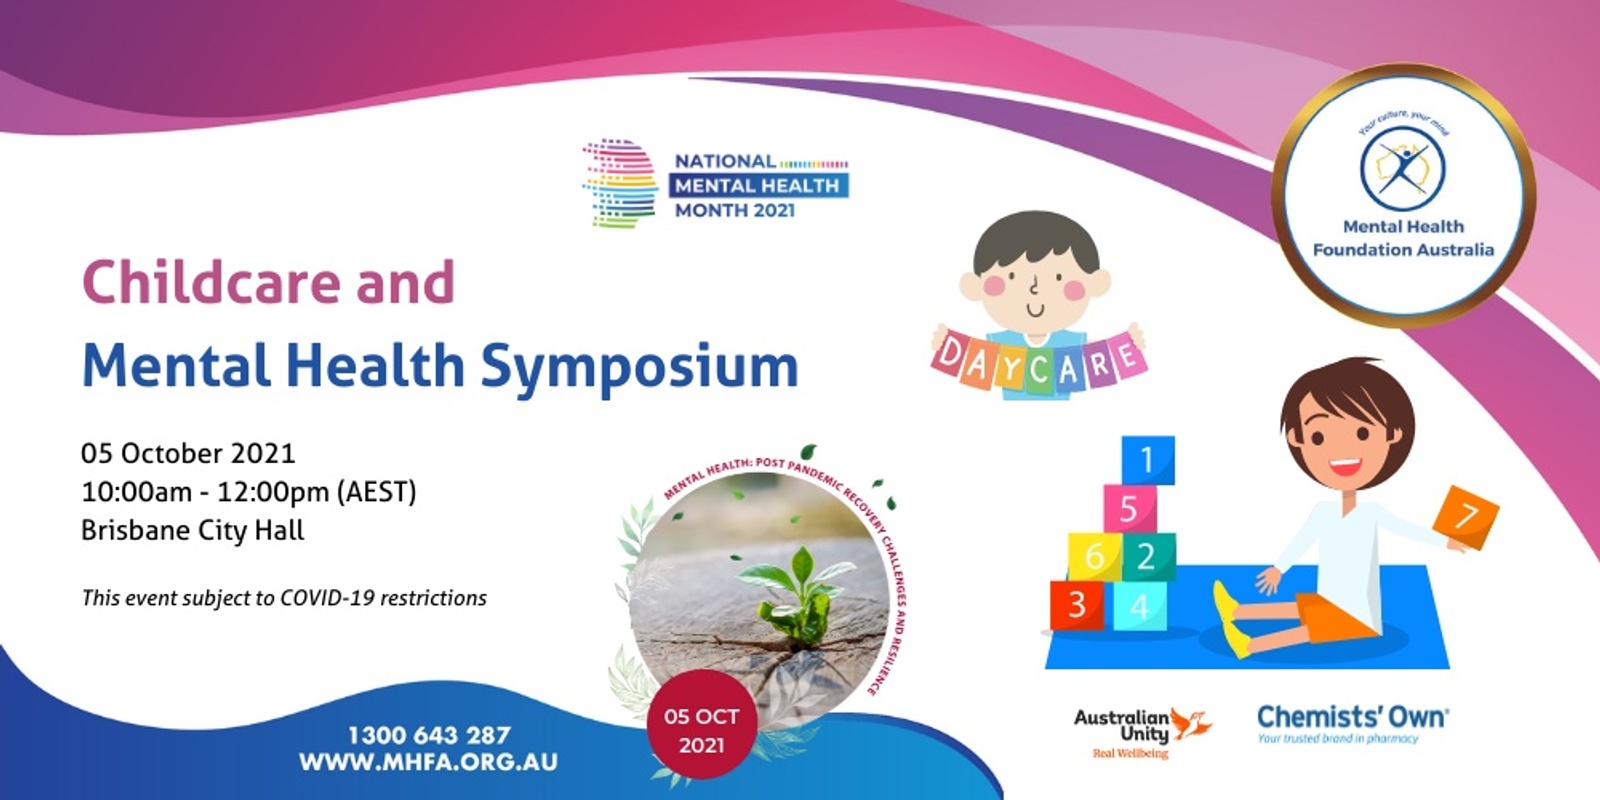 Childcare and Mental Health Symposium